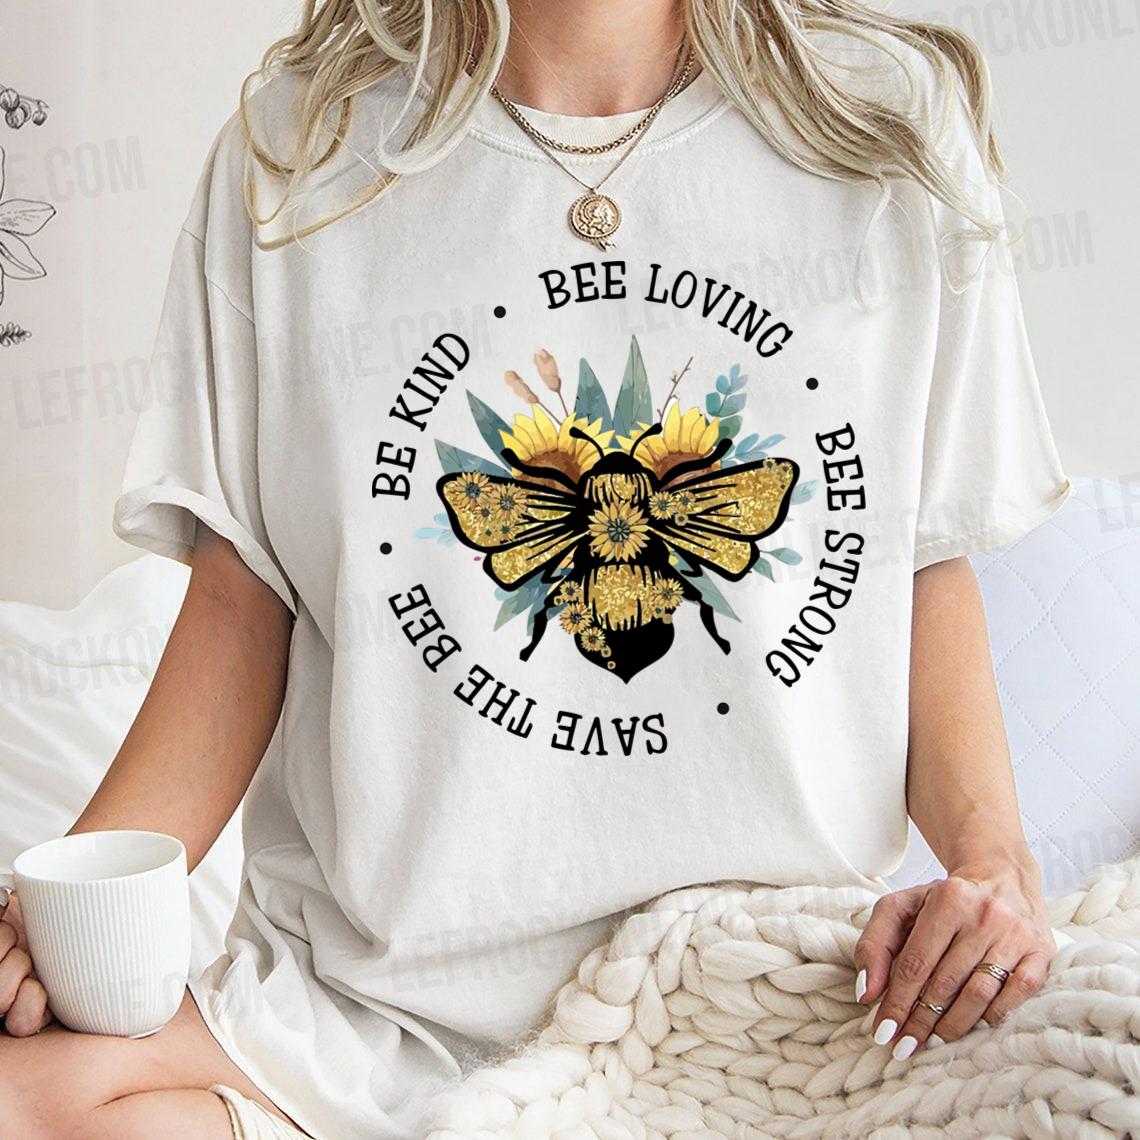 Sparkling Bee With Save The Bees Quote Save The Bees Shirt